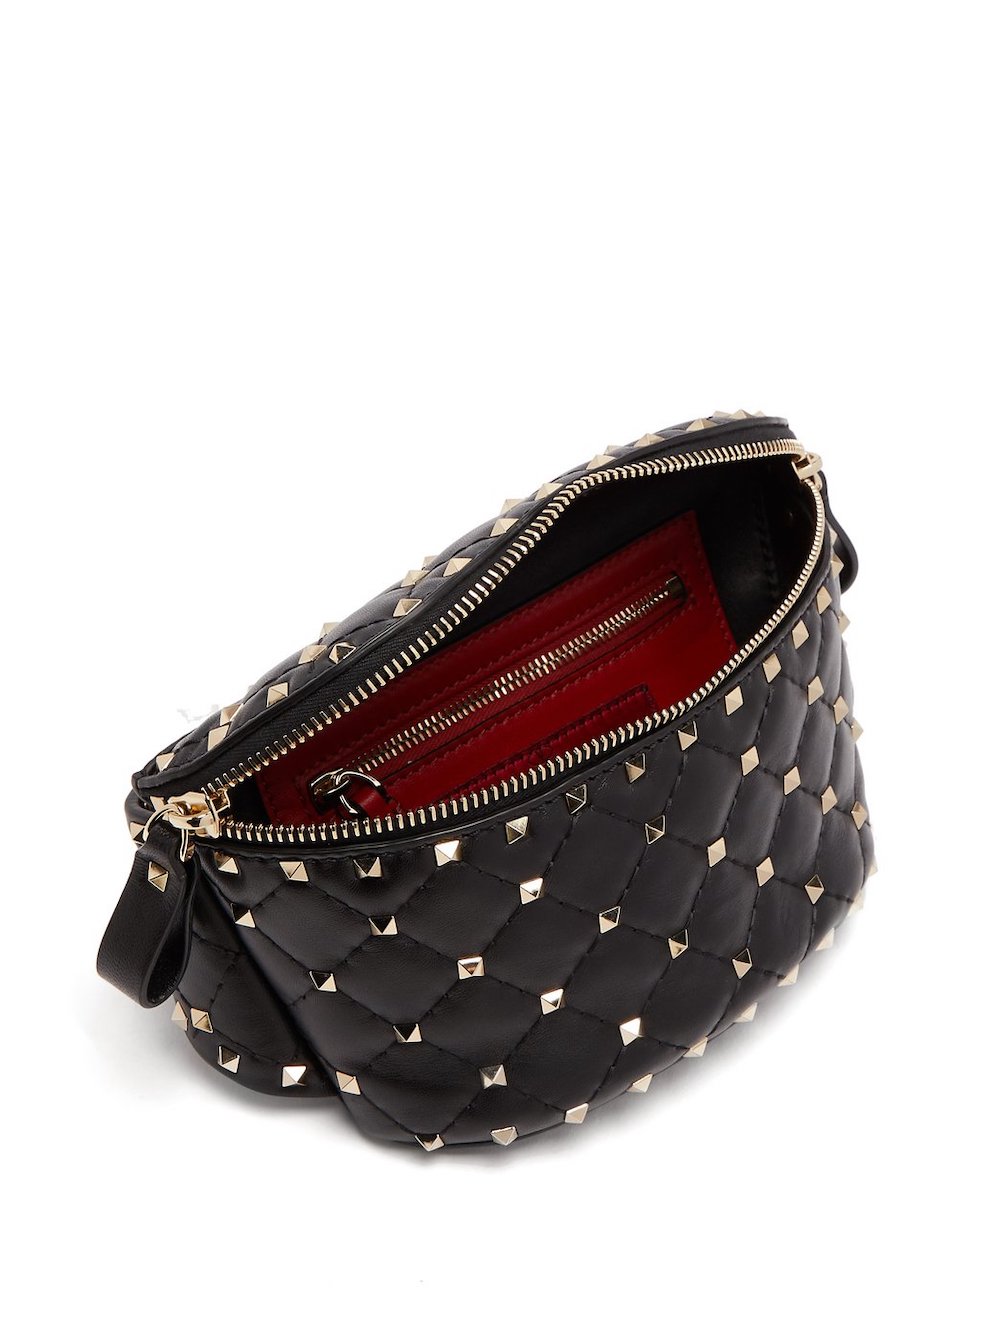 black valentino studded leather fanny pack